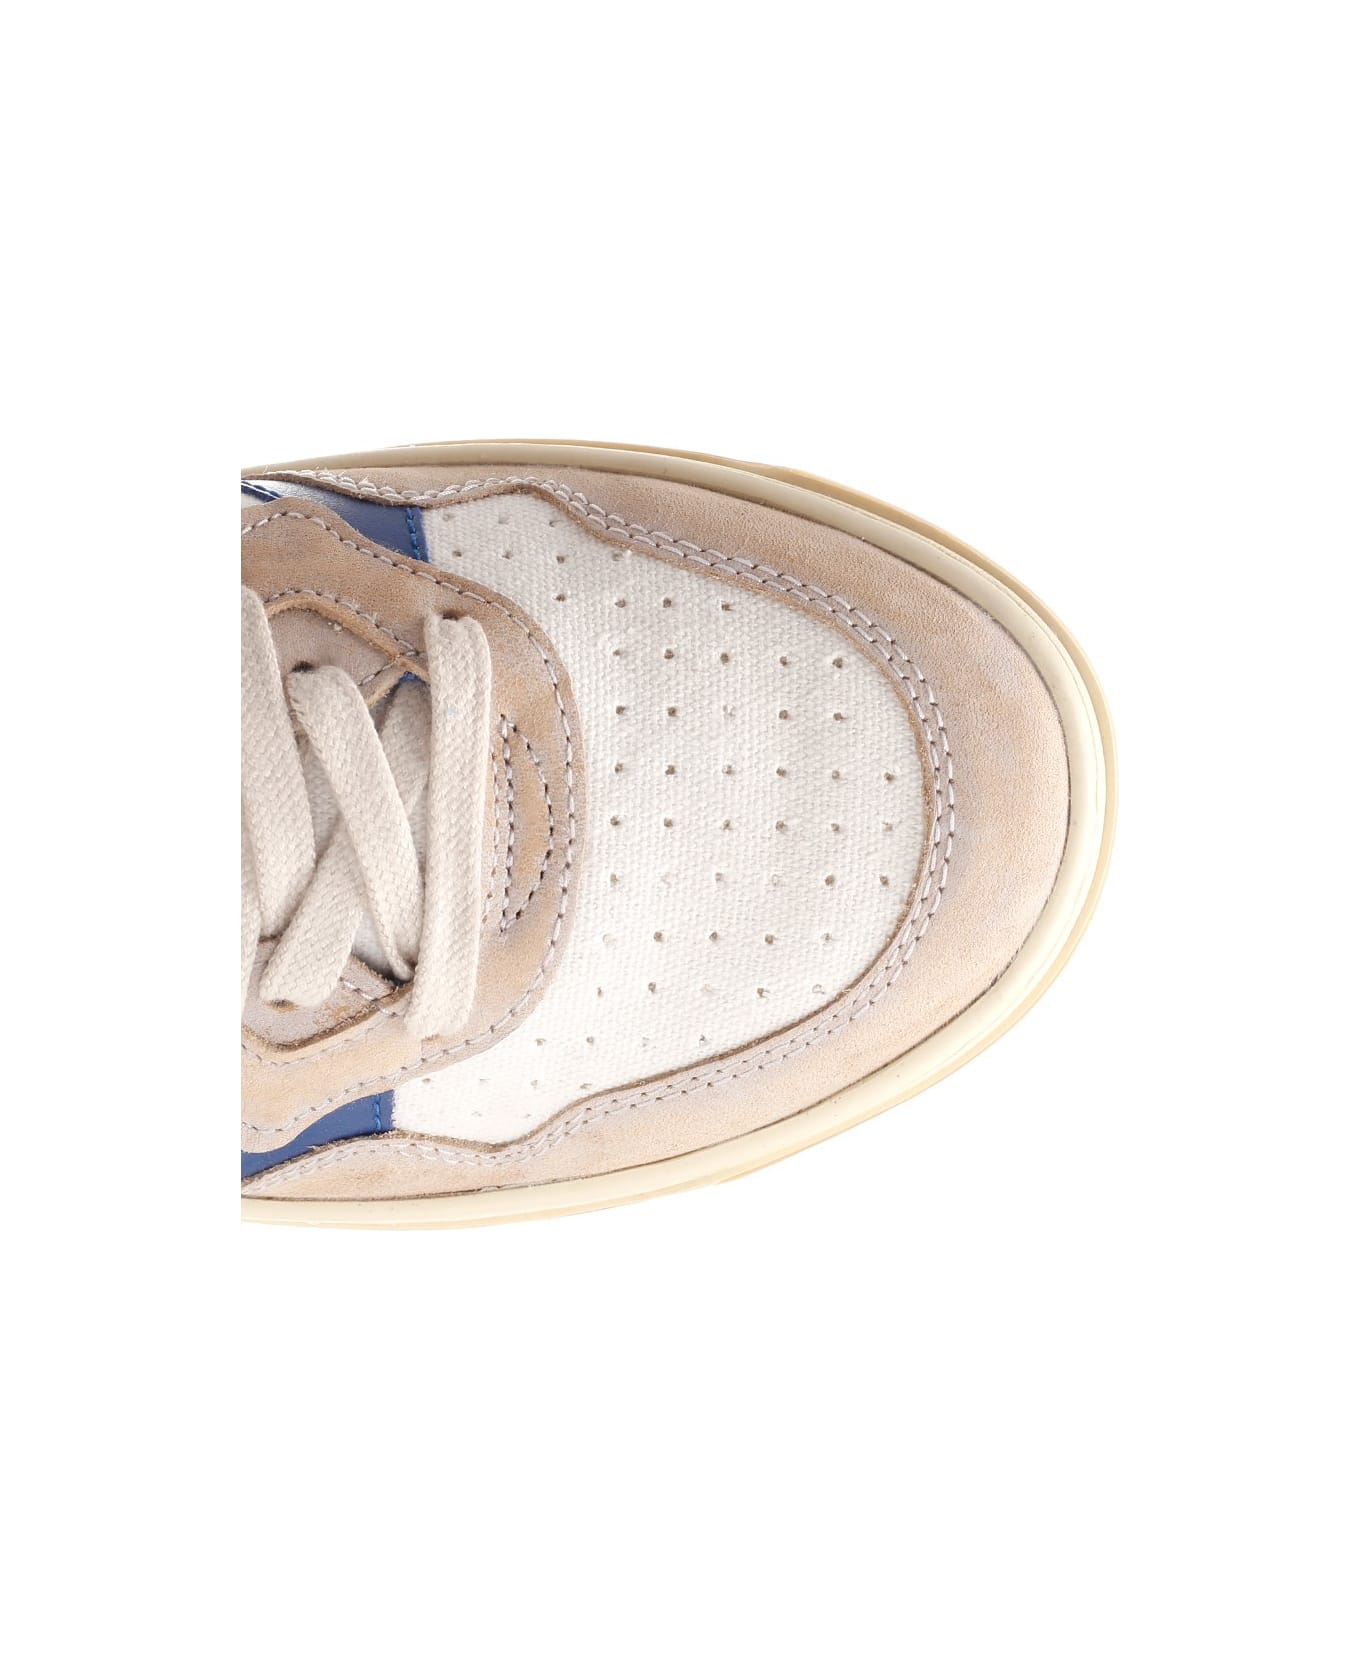 Autry Leather Sneakers - White